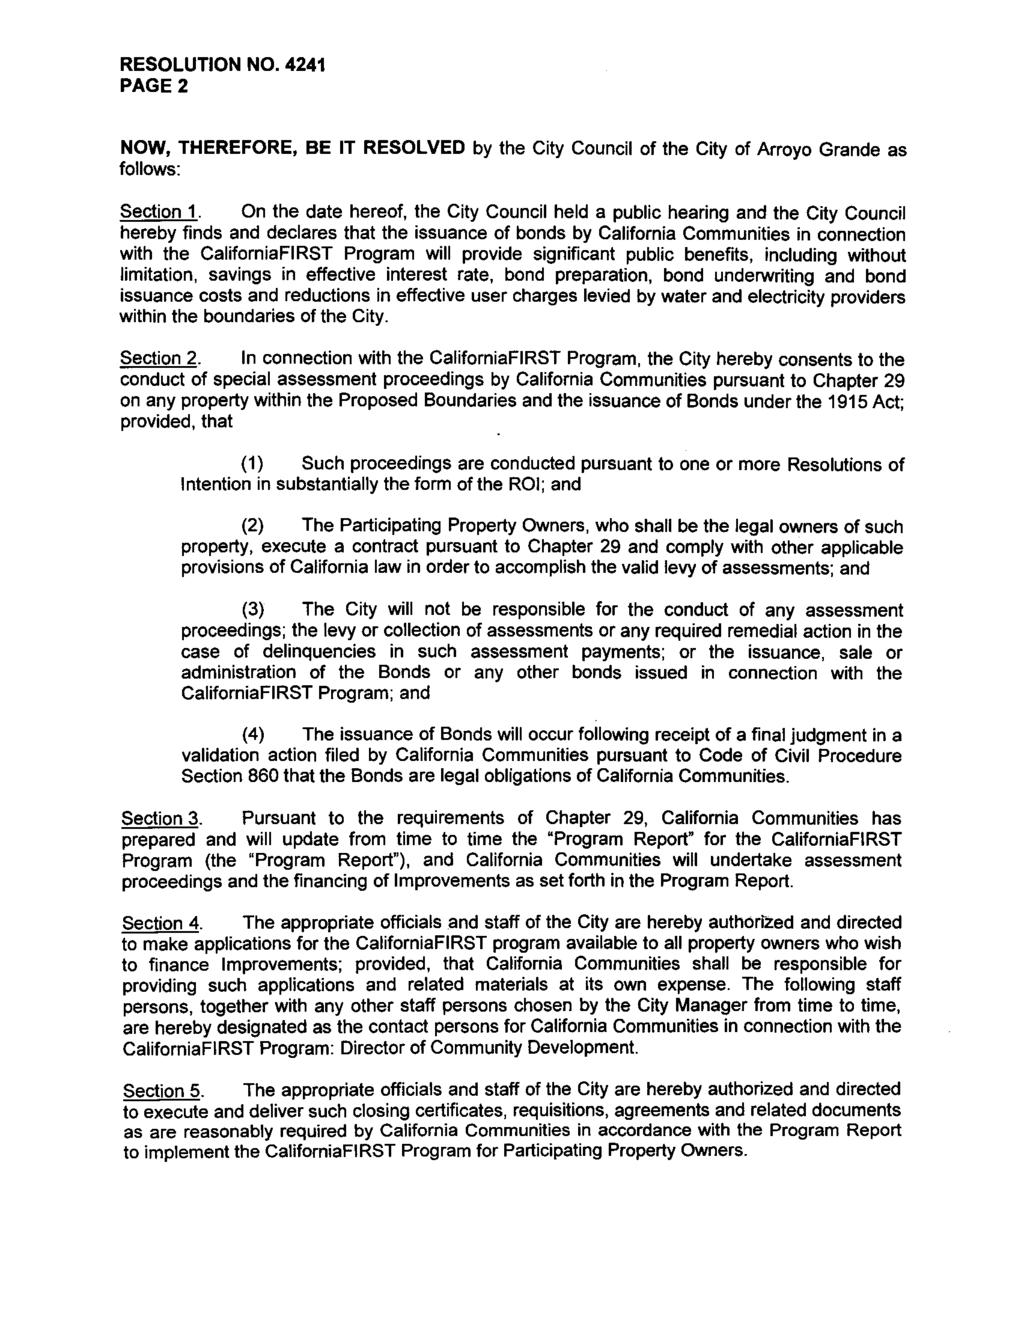 RESOLUTION NO. 4241 PAGE2 NOW, THEREFORE, BE IT RESOLVED by the City Council of the City of Arroyo Grande as follows: Section 1.